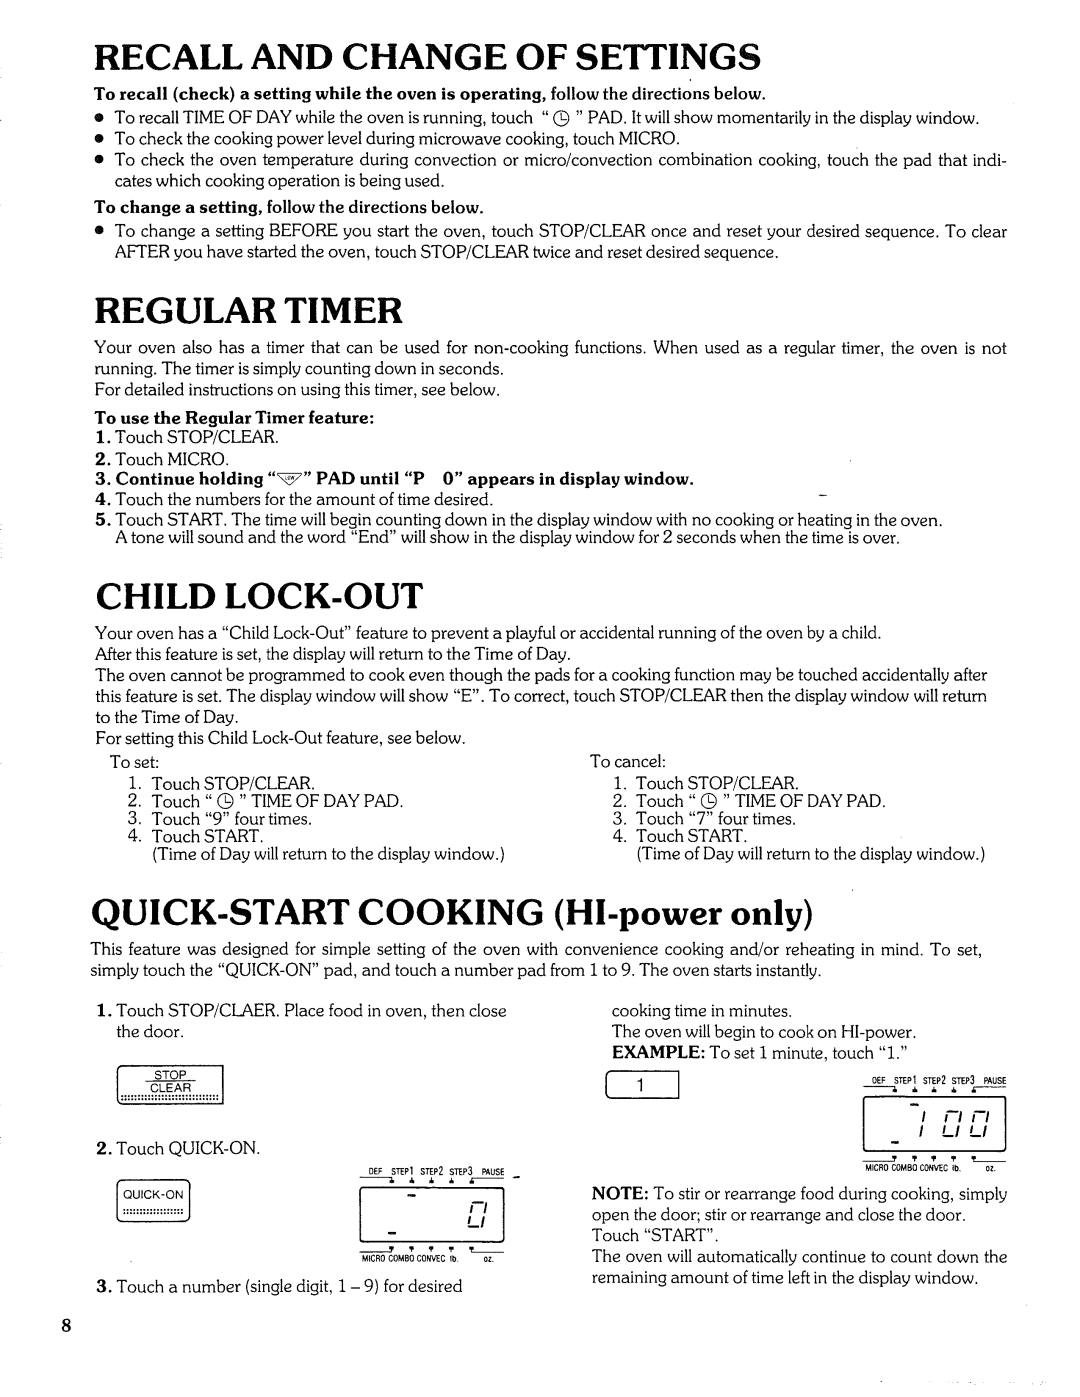 Sears Microwave Oven manual Recall And Change Of Settings, Regular Timer, Child Lock-Out, QUICK-STARTCOOKING HI-power only 